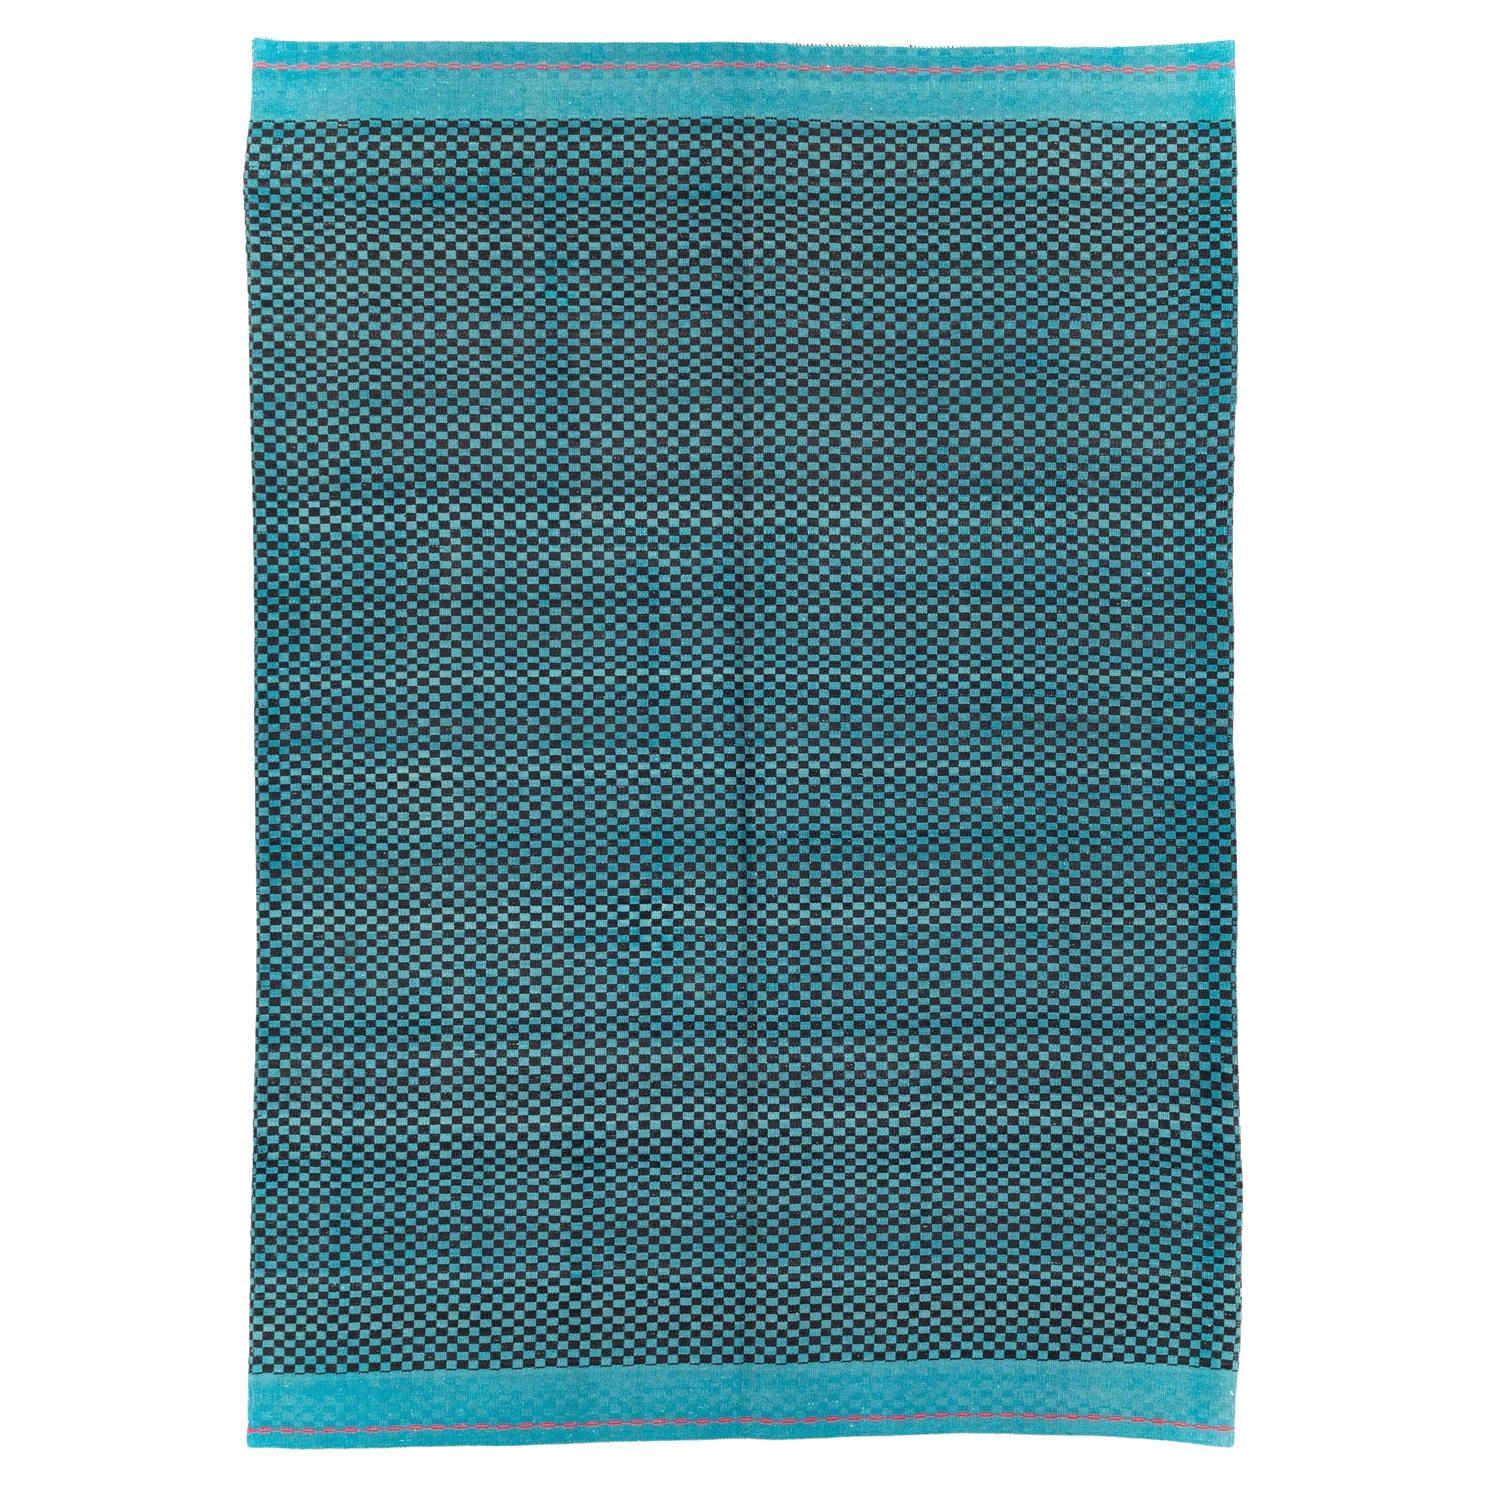 Mid-20th Century Handmade Turkish Flatweave Accent Rug in Turquoise